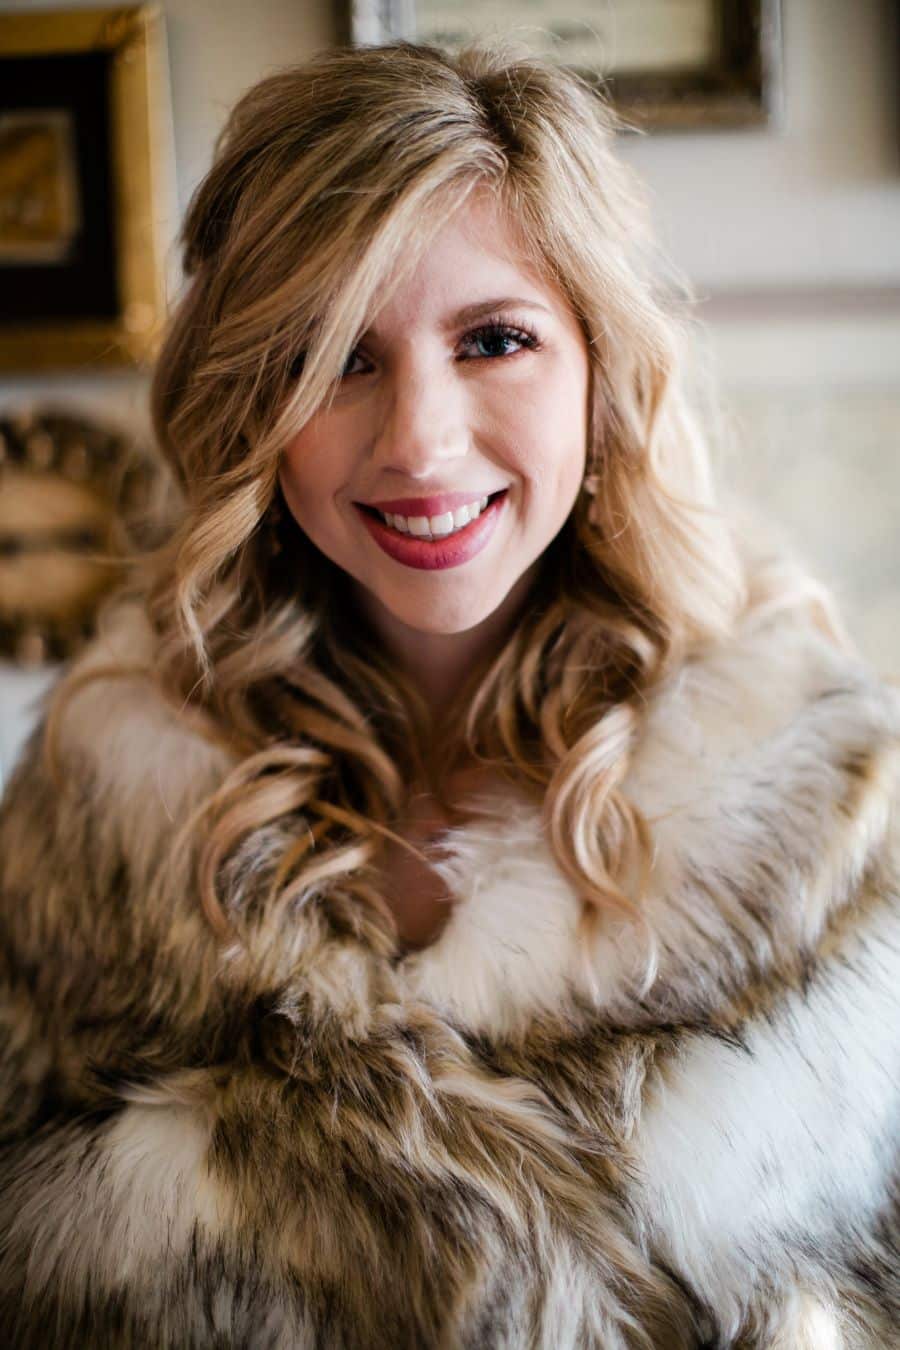 Bride smiling with fur caplet on and curled hair / Elopement / Spring / March / Dusty Rose